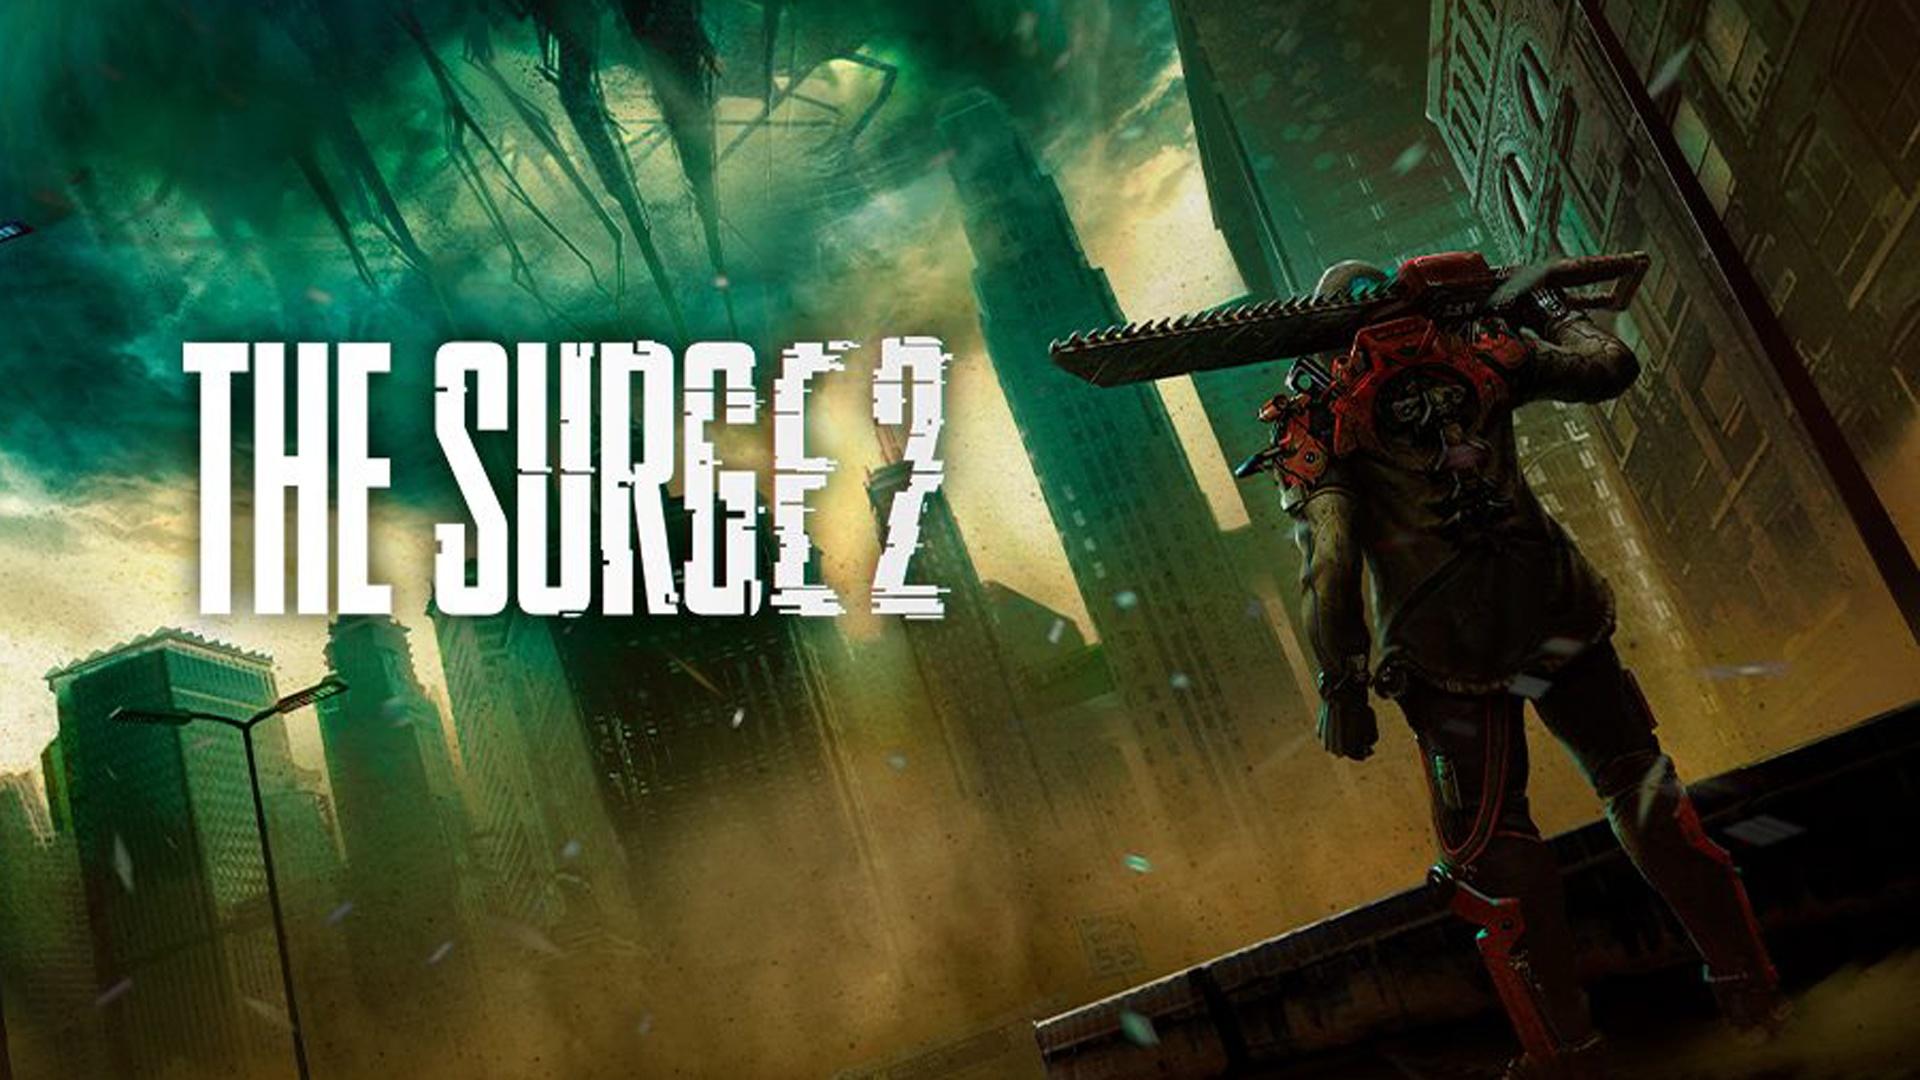 GC 2018 Surge 2 will be 4 times larger than the first